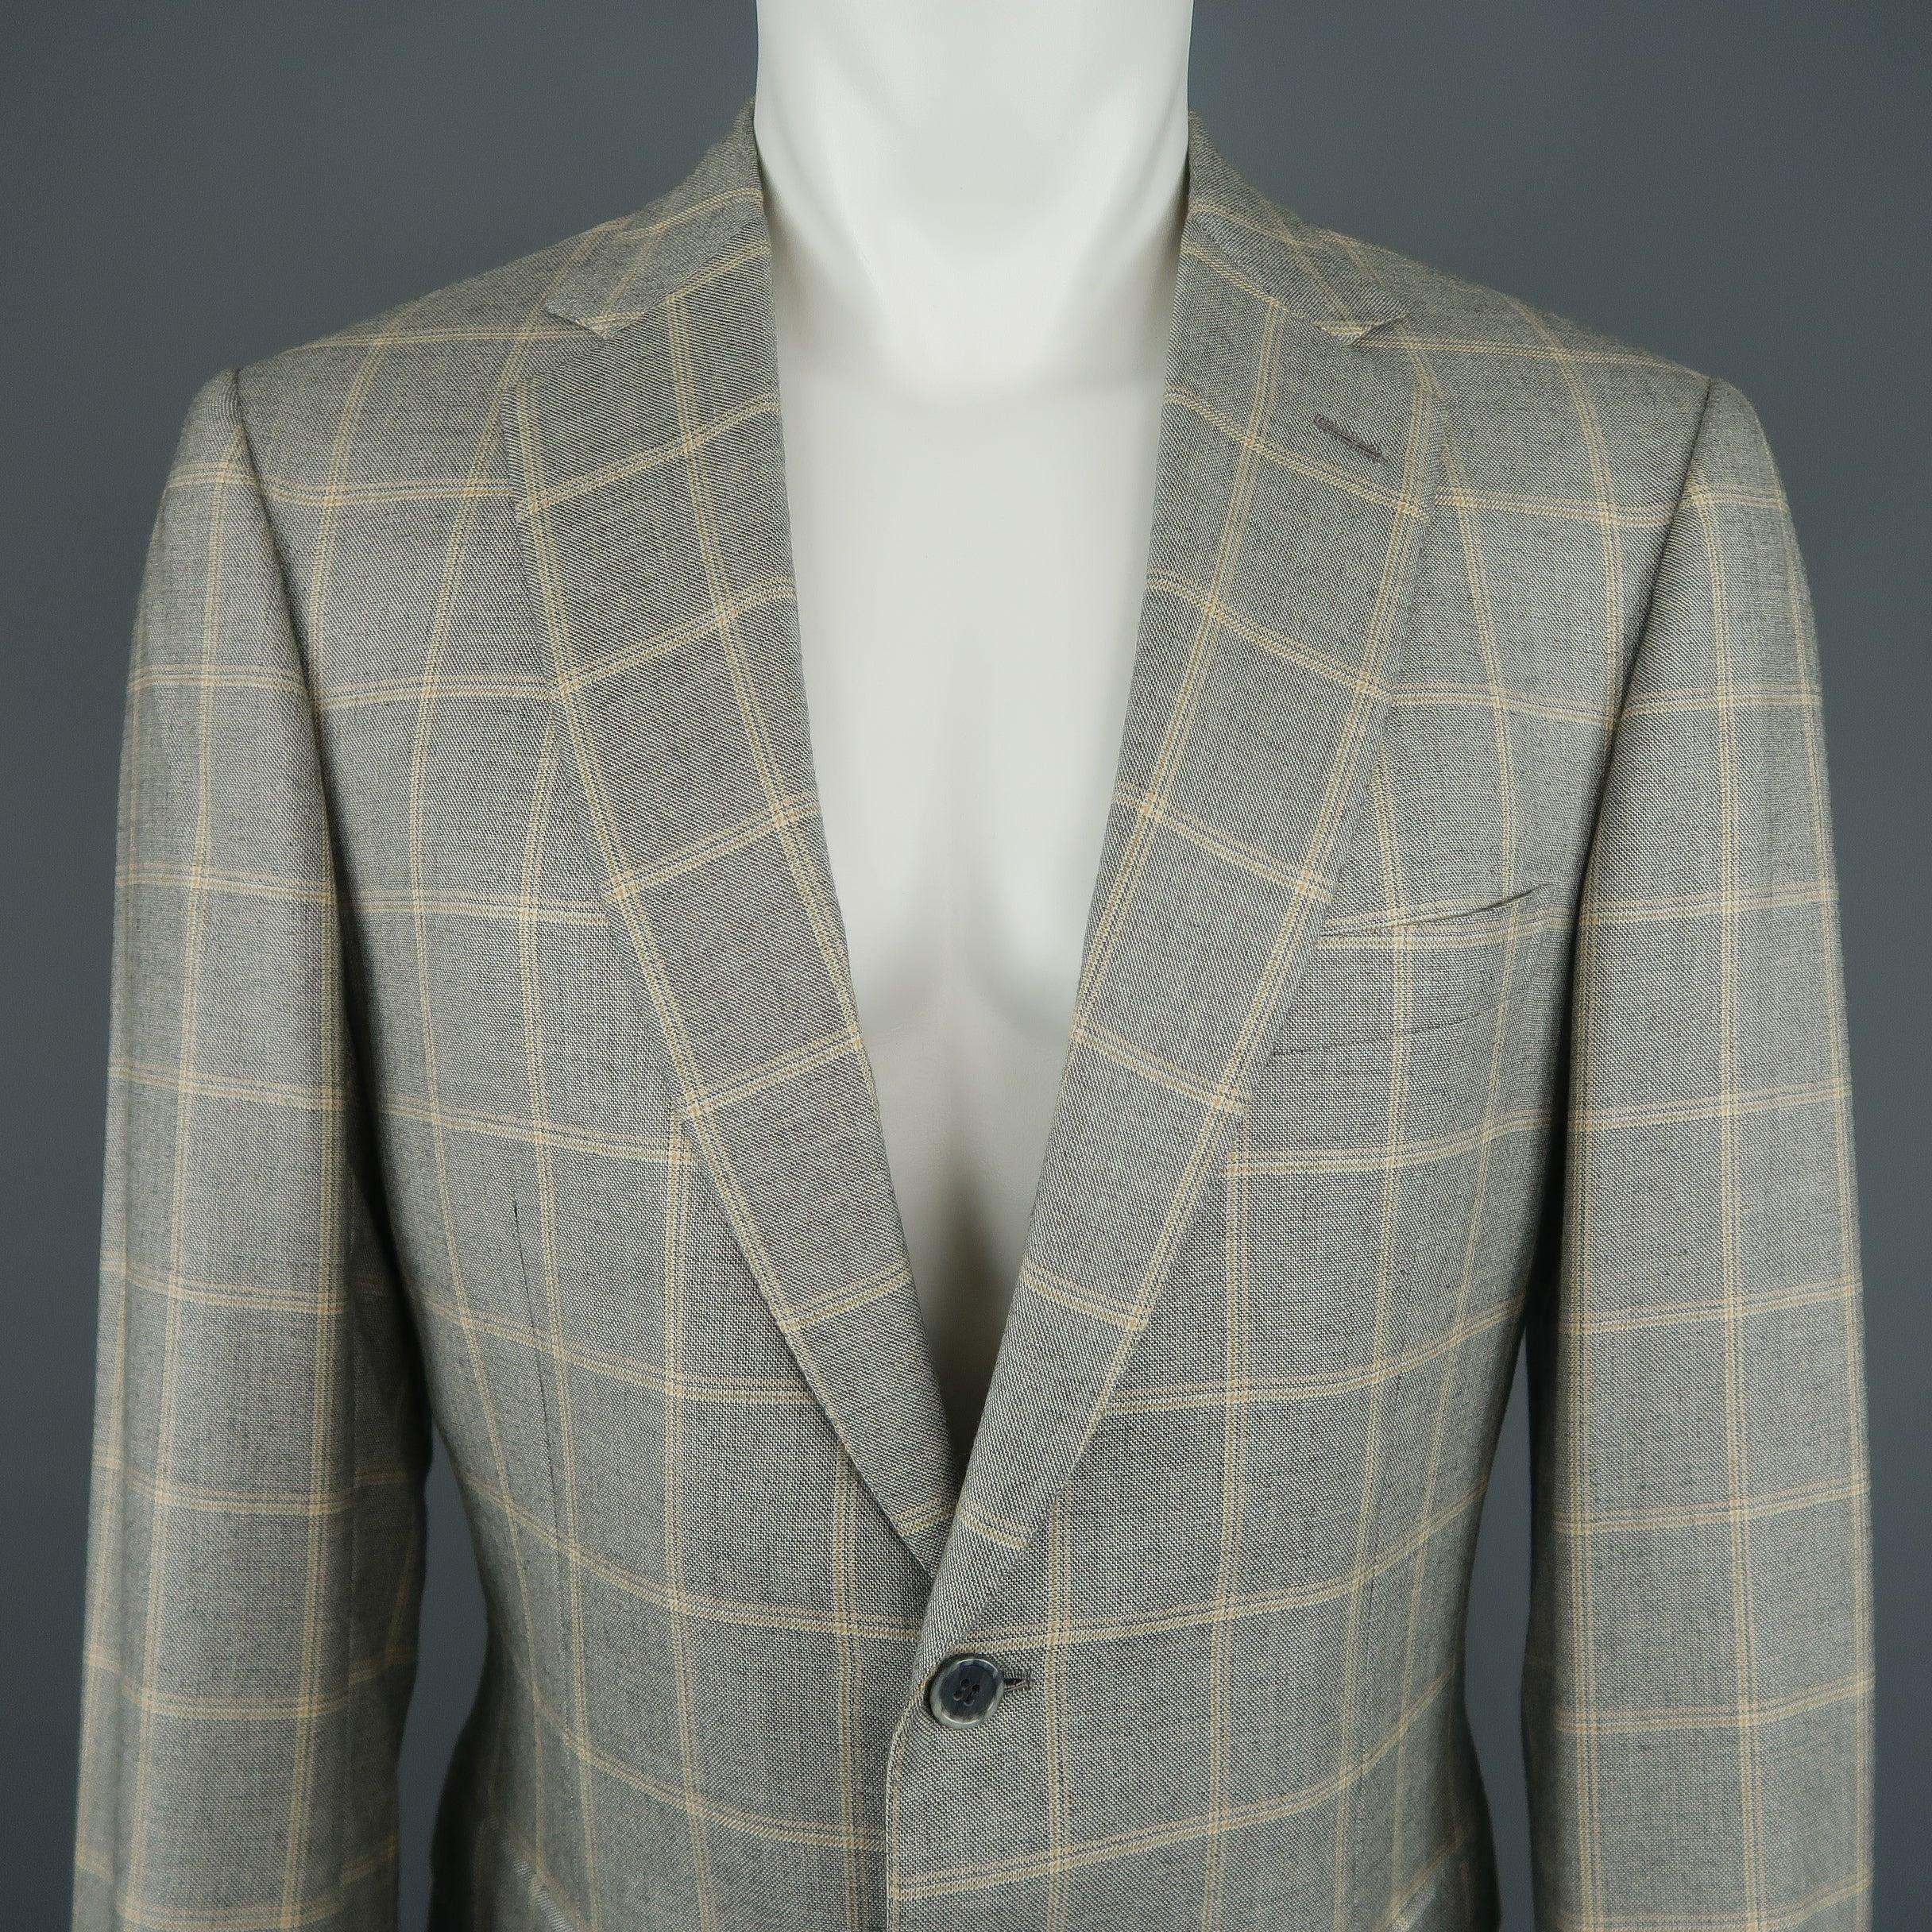 BRIONI sport coat jacket comes in silk wool blend light gray and gold windowpane fabric with a single breasted two button closure, notch lapel, and functional button cuffs. Made in Italy.Excellent Pre-Owned Condition. 

Marked:   40 R